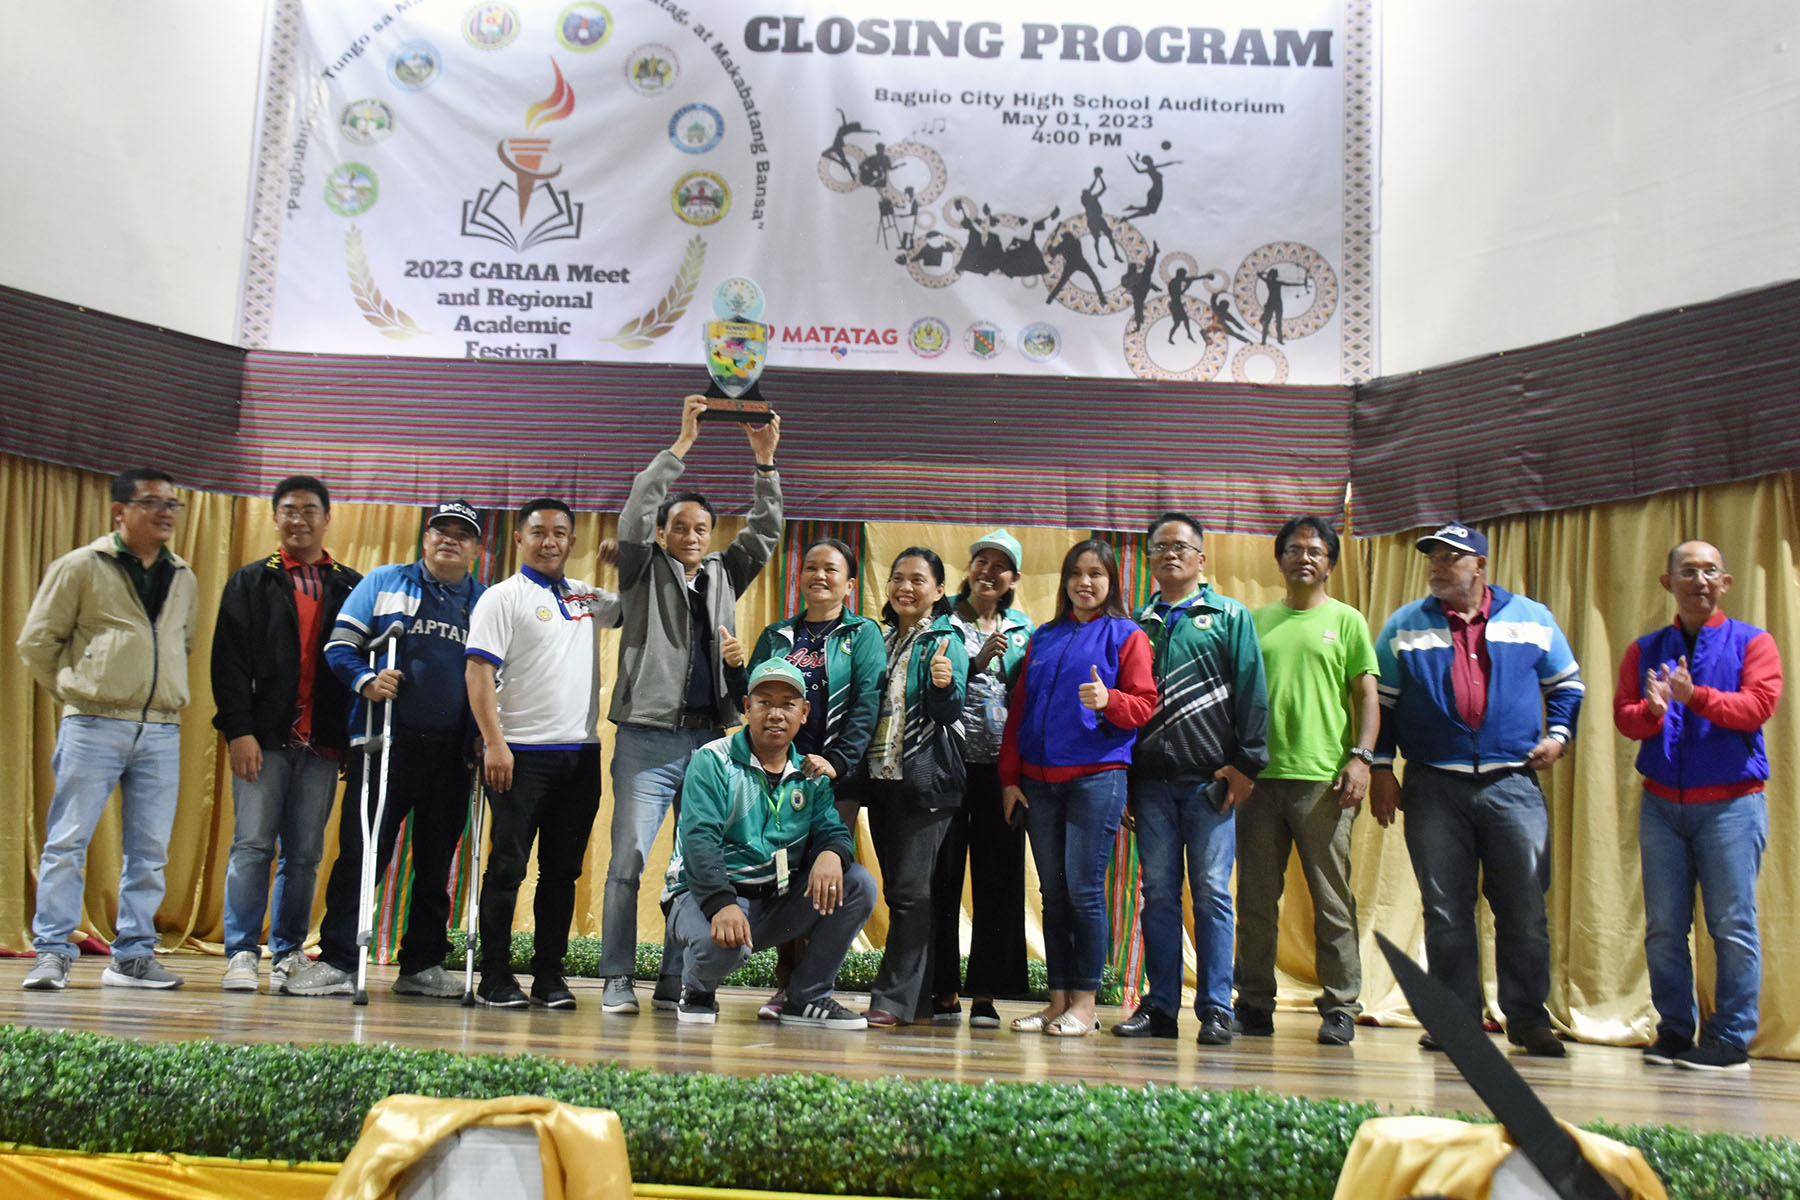 2 Apayao gymnasts receive PhP165,000 from province for CARAA success